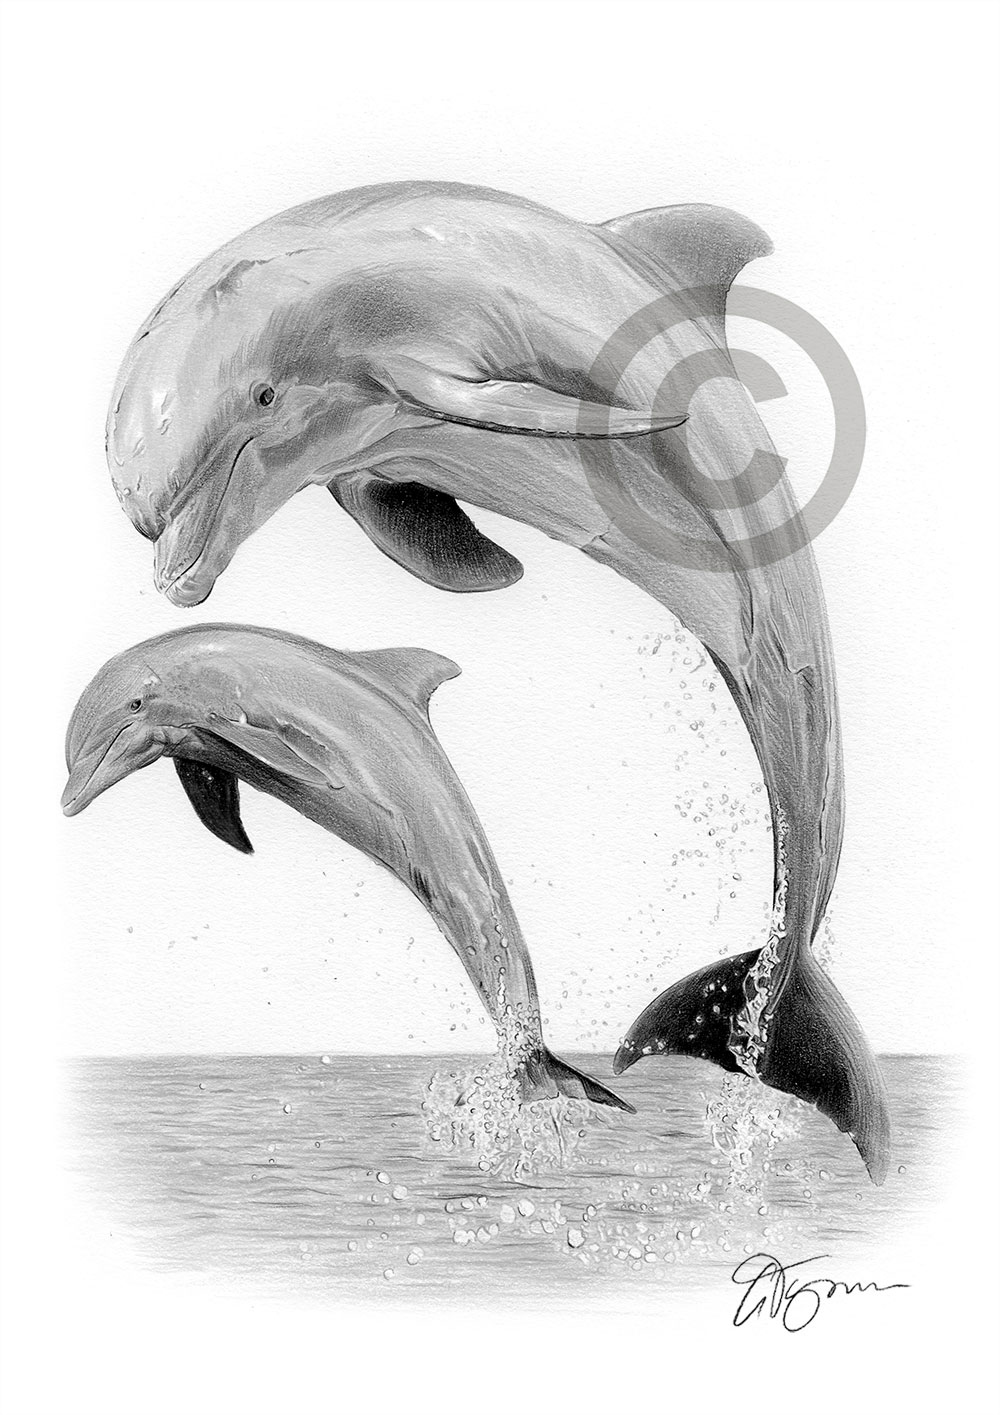 Pencil drawing of a dolphin by UK artist Gary Tymon